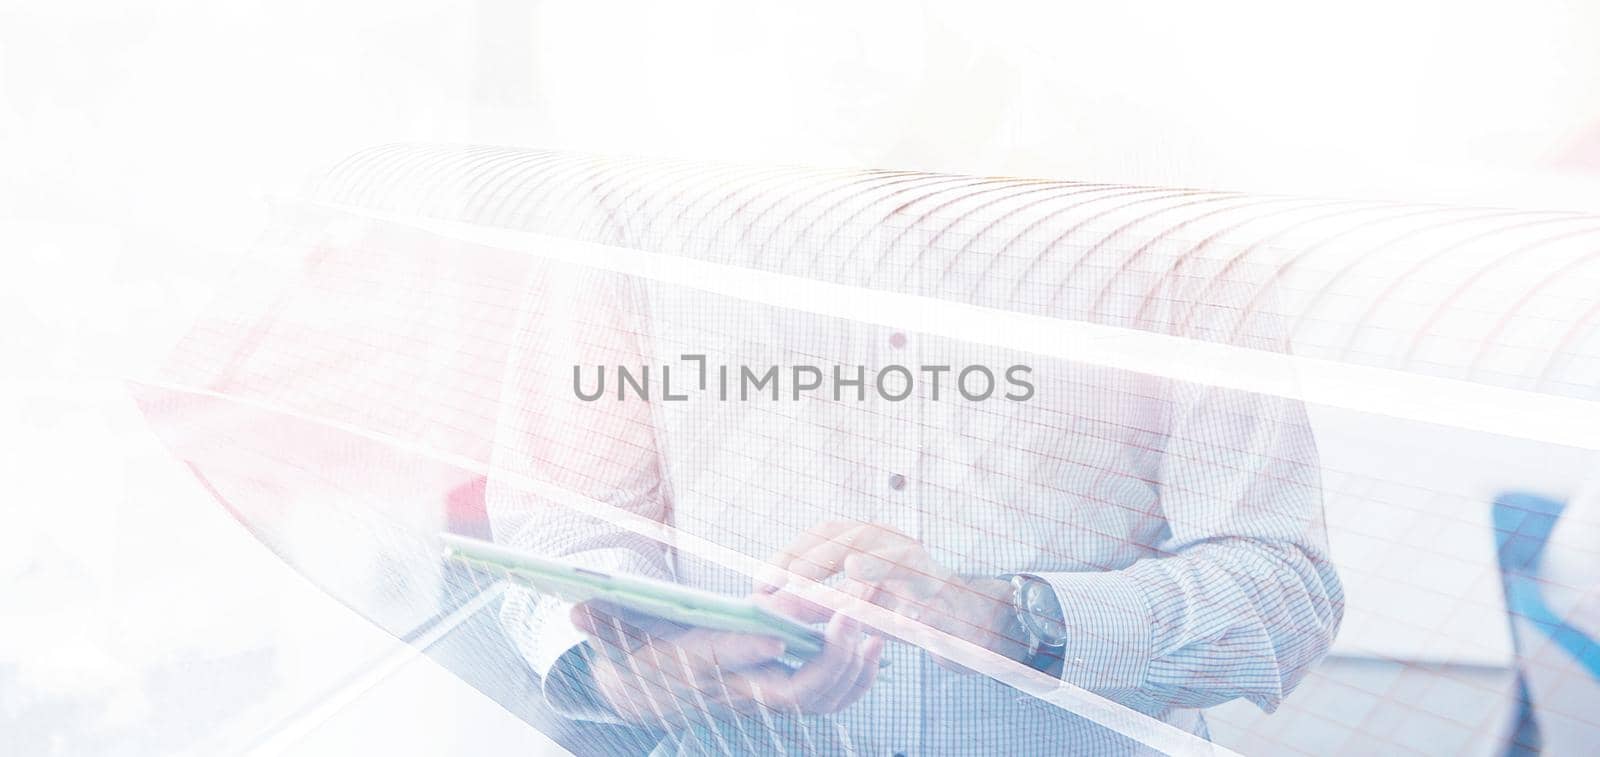 Businessman Using Tablet In Office Building by window by dotshock